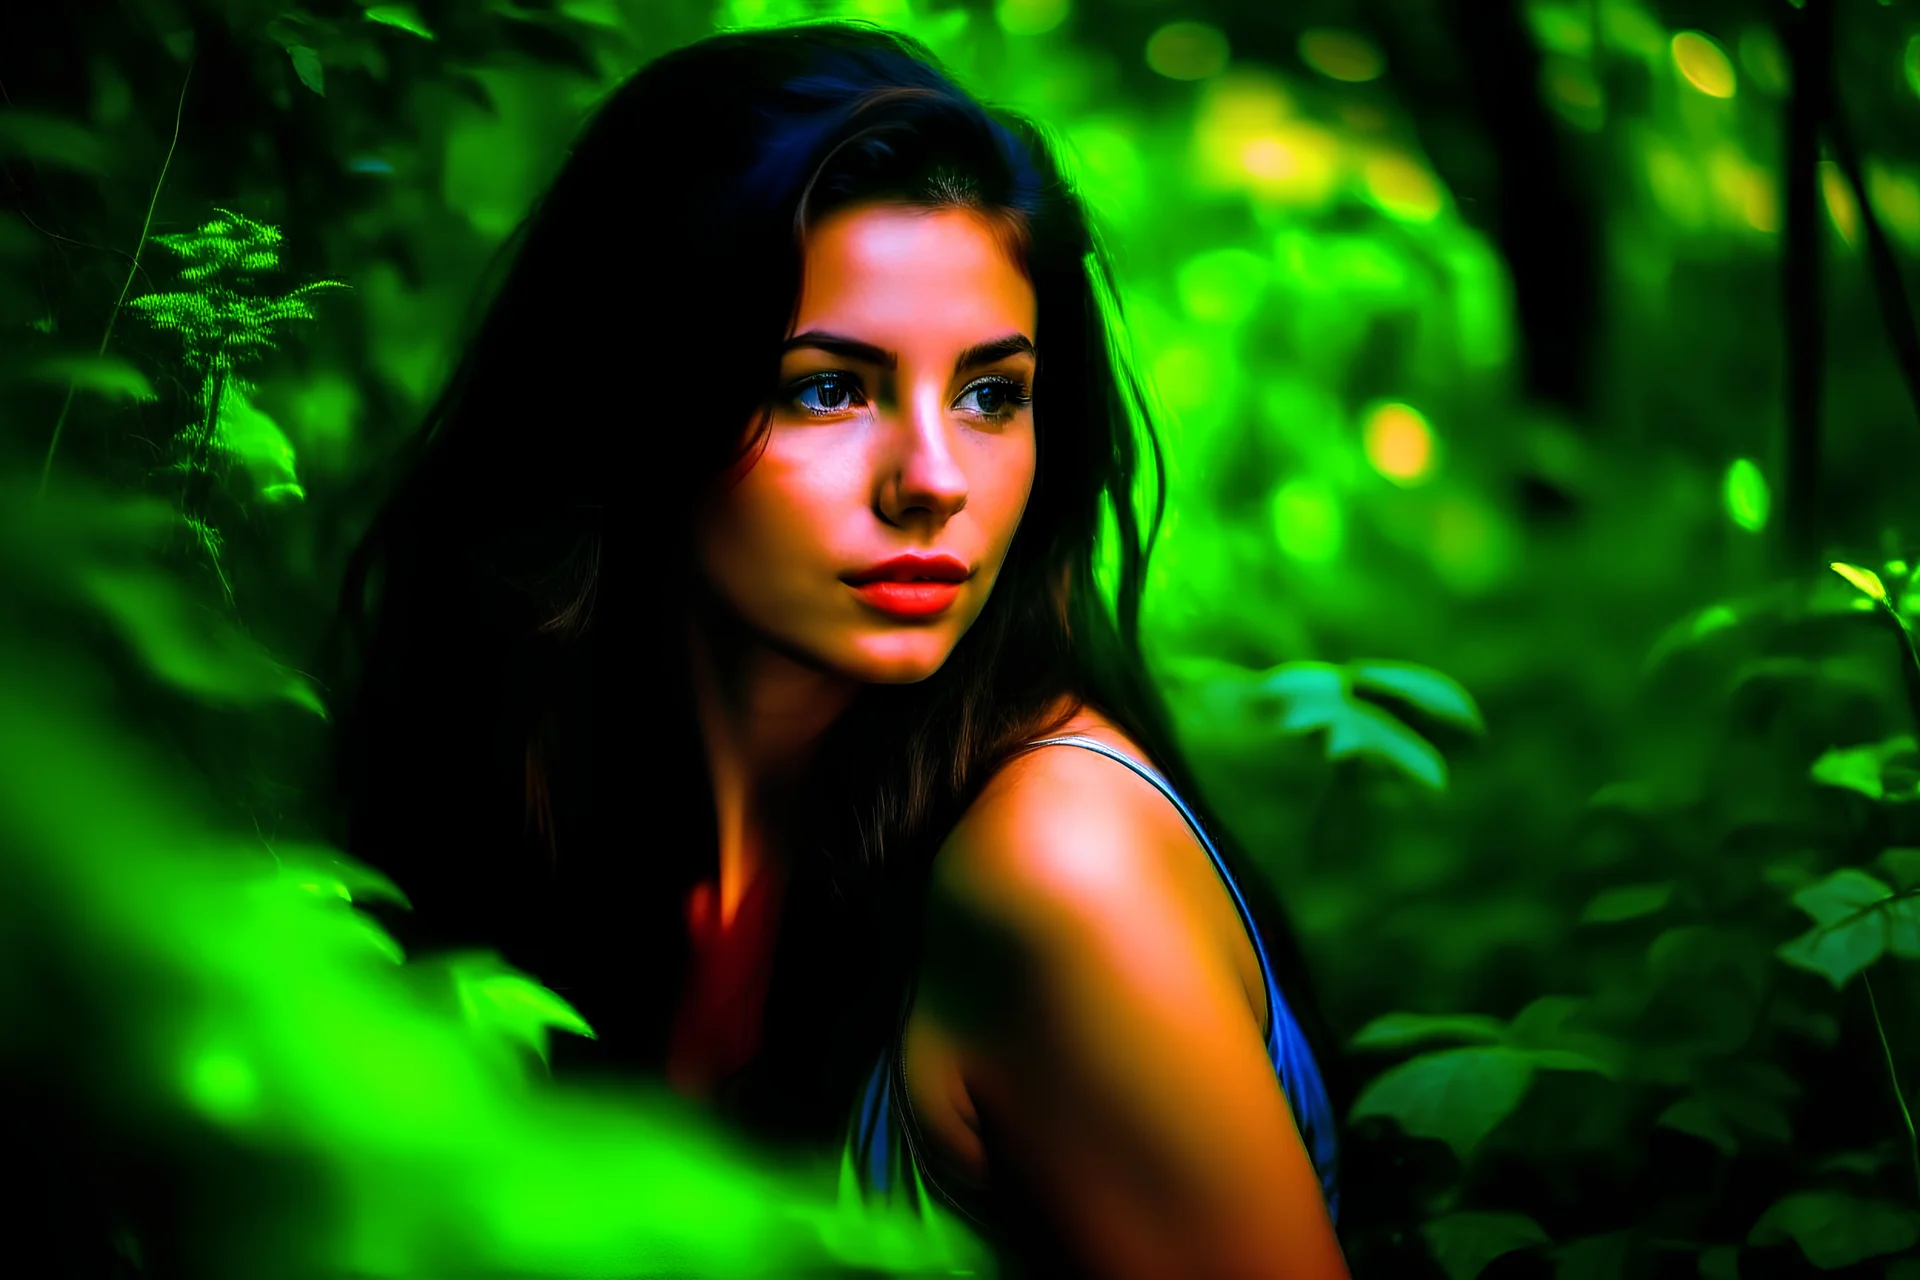 Deep in the Woods | Fashion photography poses, Girl photography poses, Girl  photography